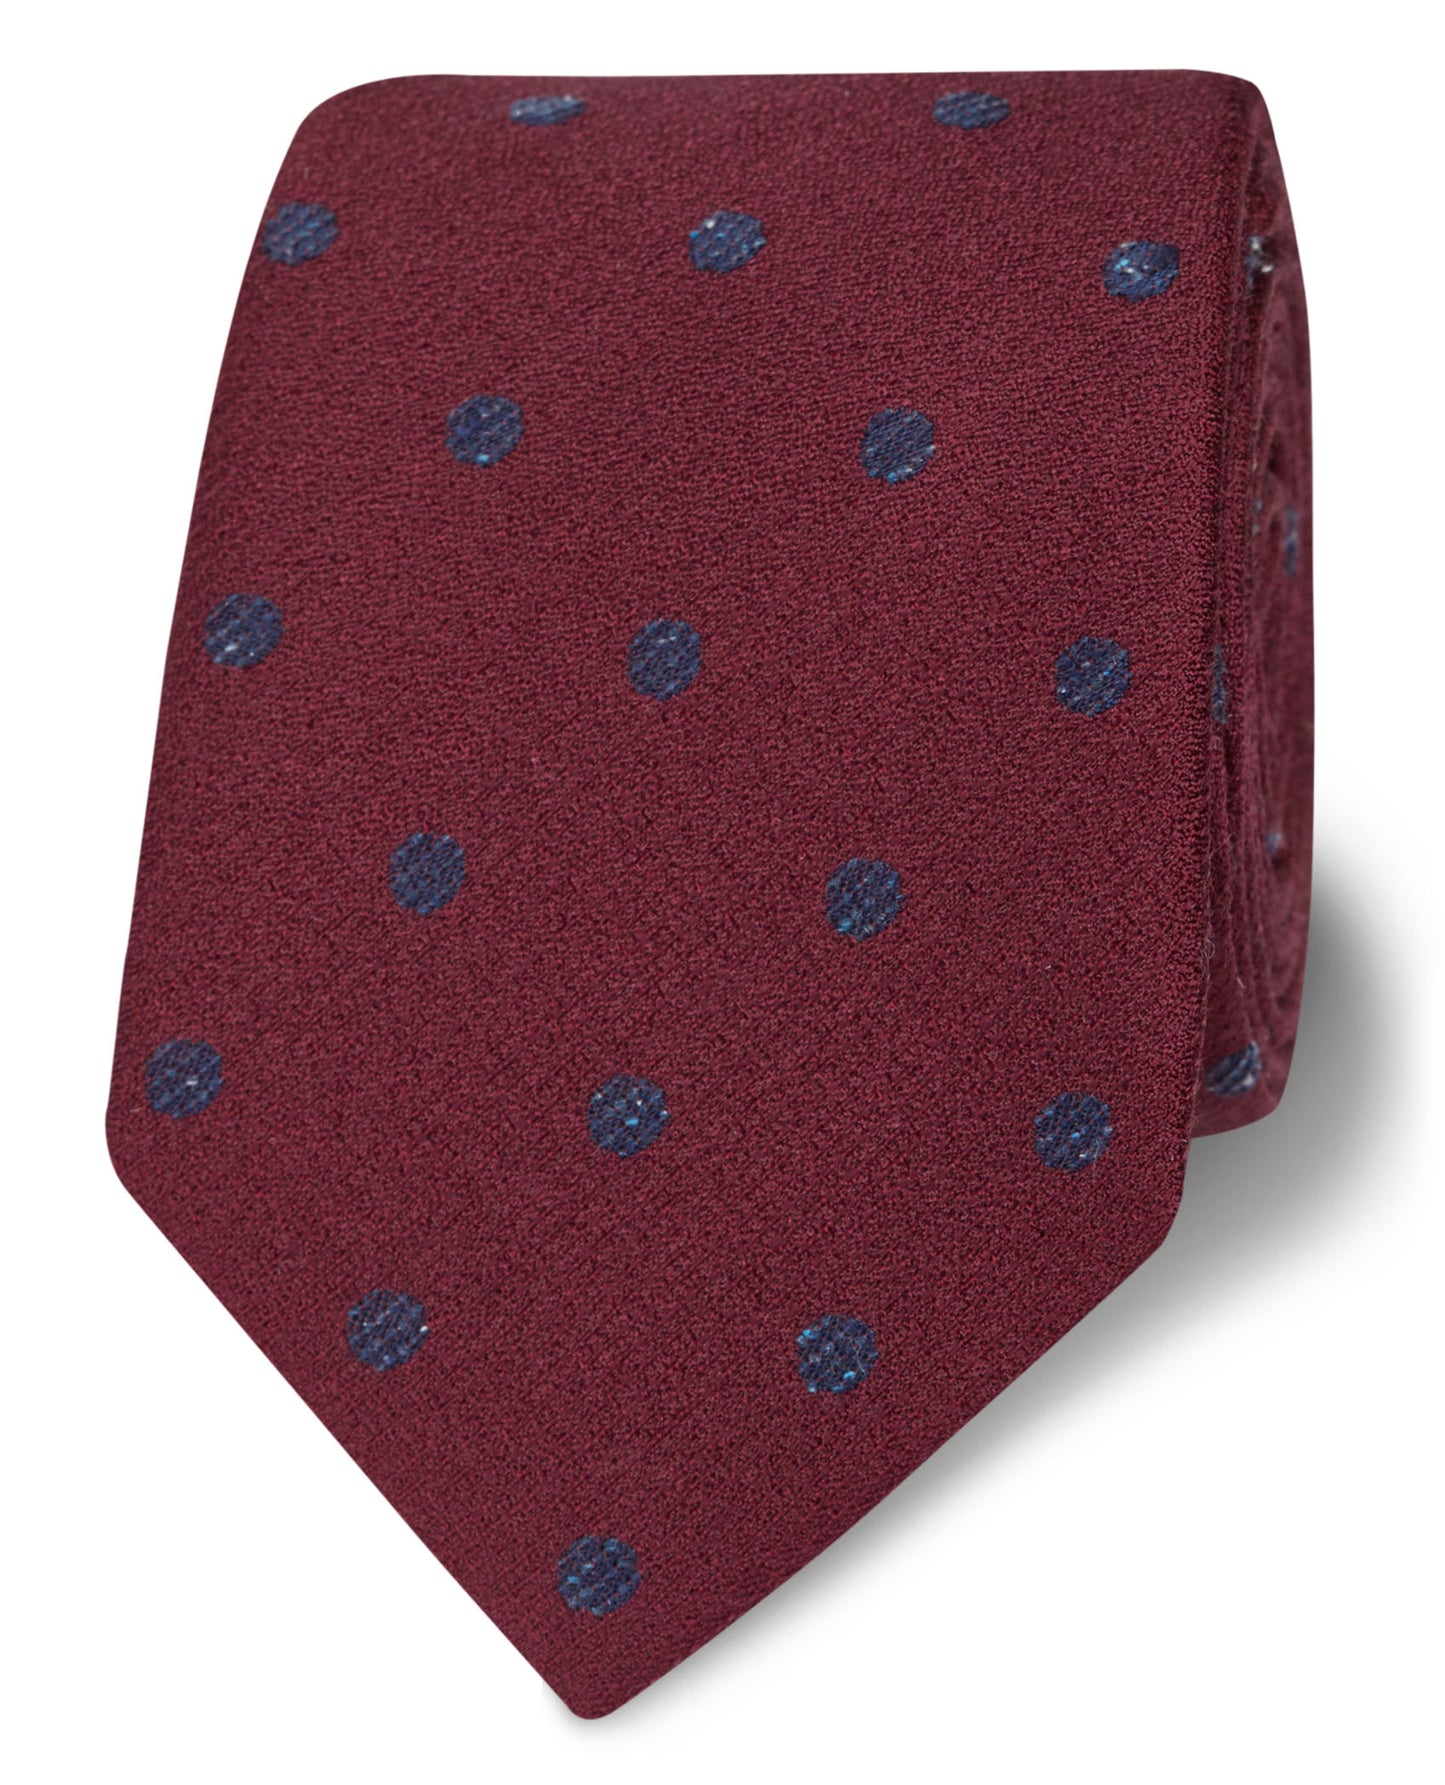 Image 2 of Mid Spot Burgundy and Navy Tie